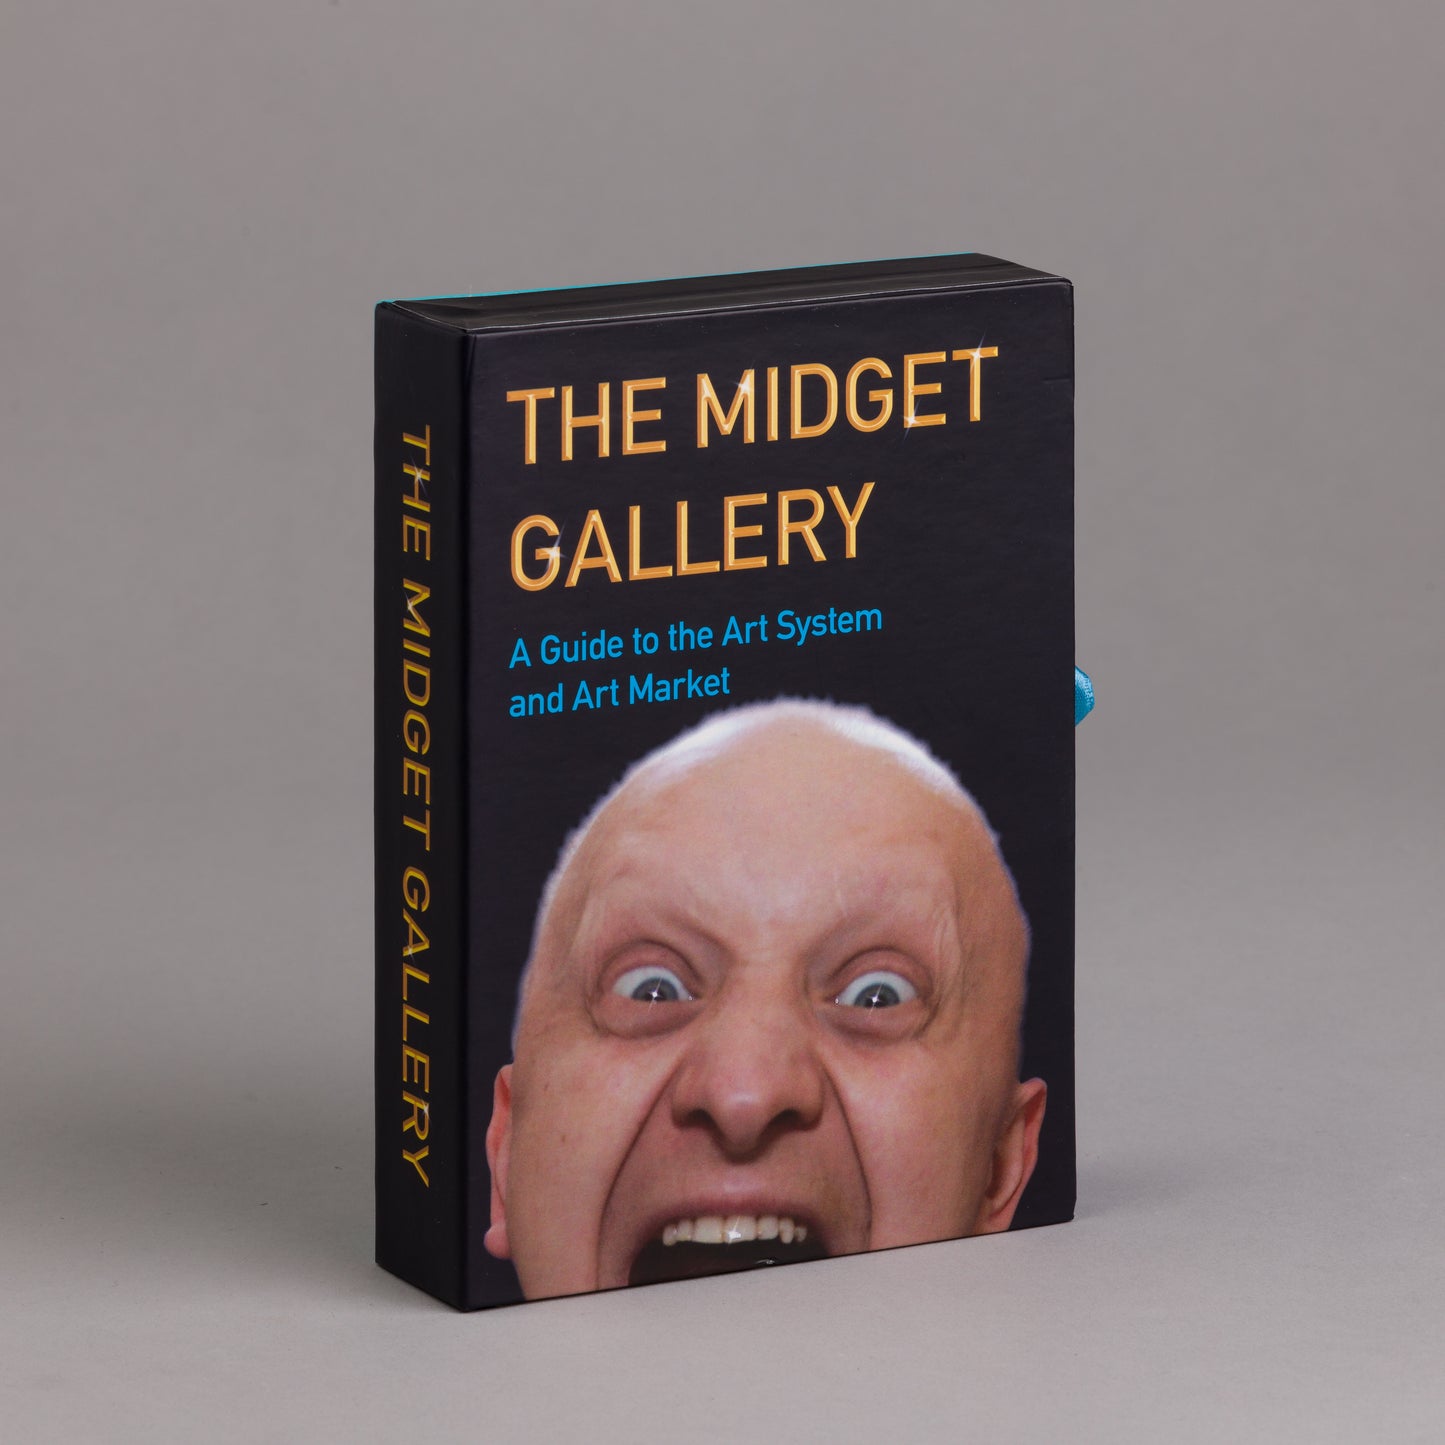 THE MIDGET GALLERY - A Guide to the Art System and Art Market, Katarzyna Kozyra